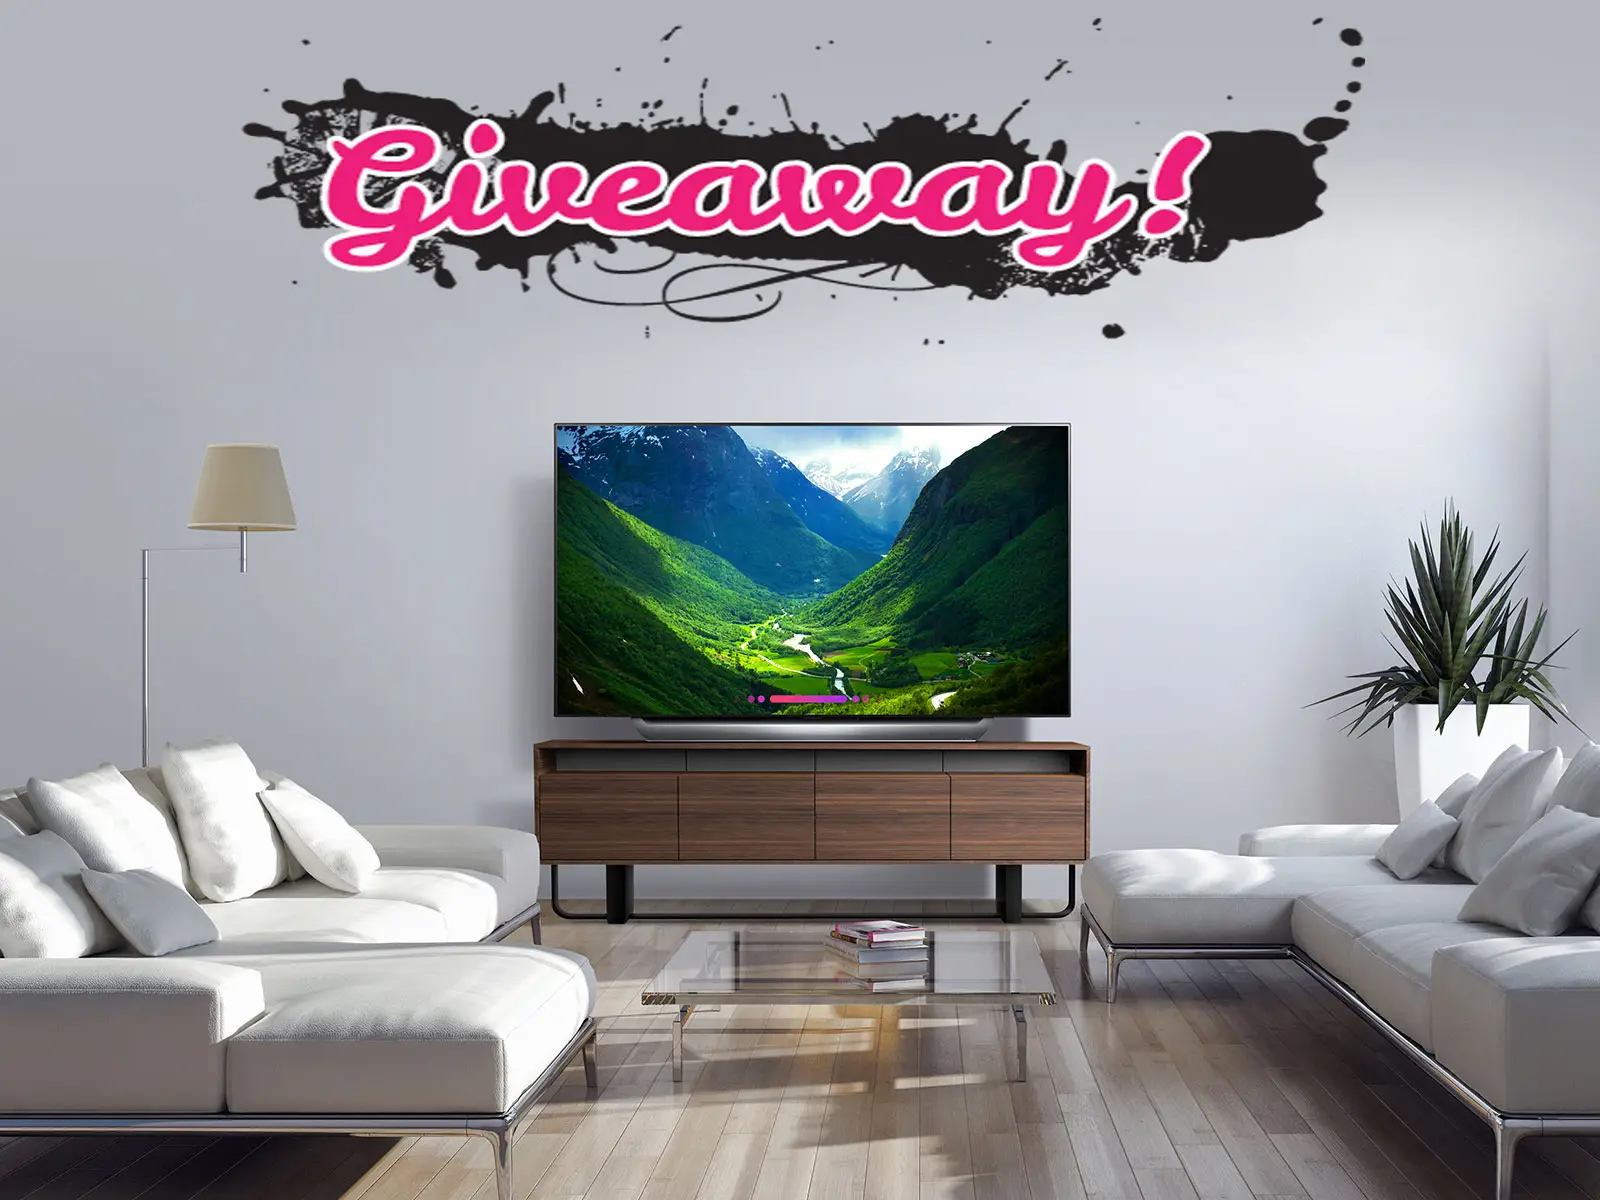 Enter for your chance to win an LG 65-inch TV; Chefman Air Fryer and $125 CBS All Access gift card from CNET and Chowhound's Big Game Giveaway